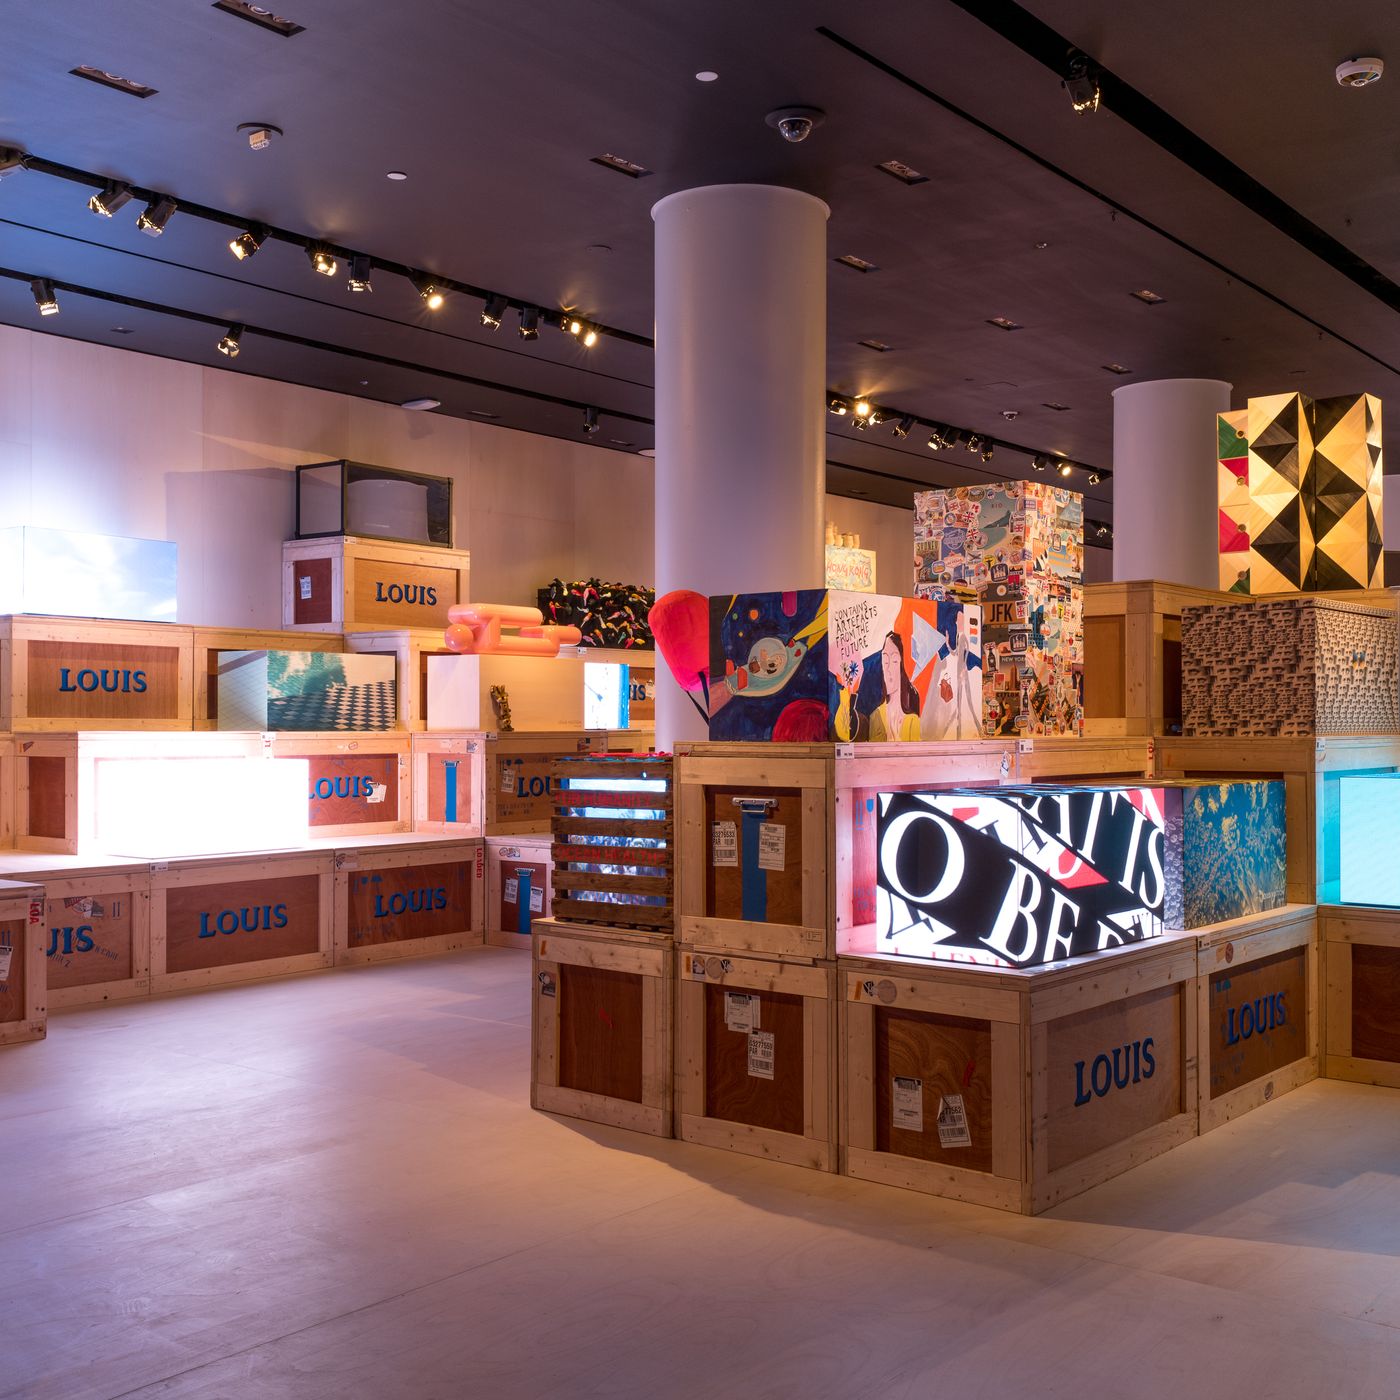 A Massive Louis Vuitton Exhibition Has Opened In NYC's Former Barney's  Location - Secret NYC